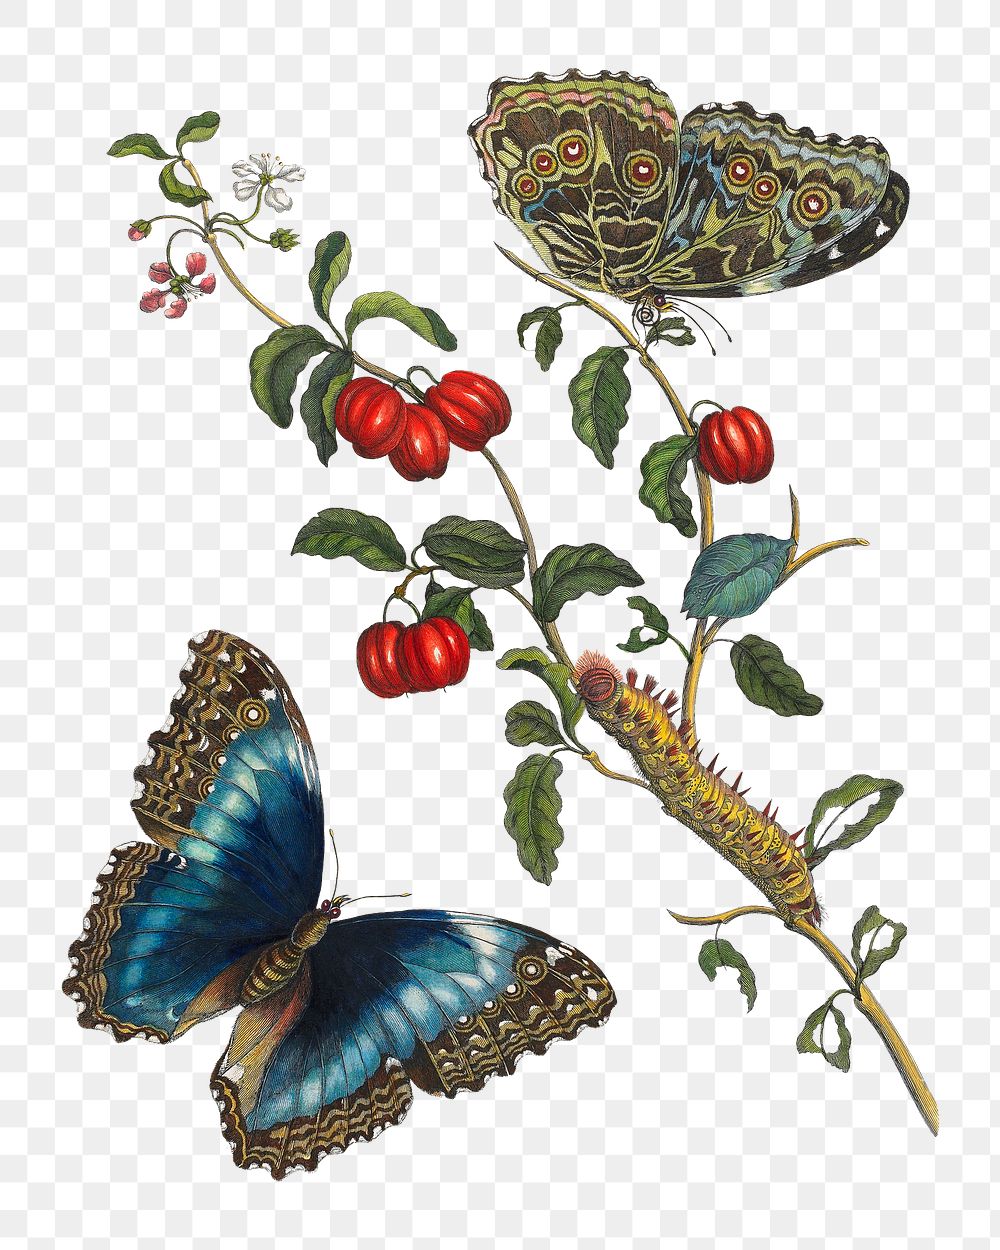 PNG Blue Butterflies and Red Fruits, vintage botanical illustration by Maria Sibylla Merian, transparent background. Remixed…